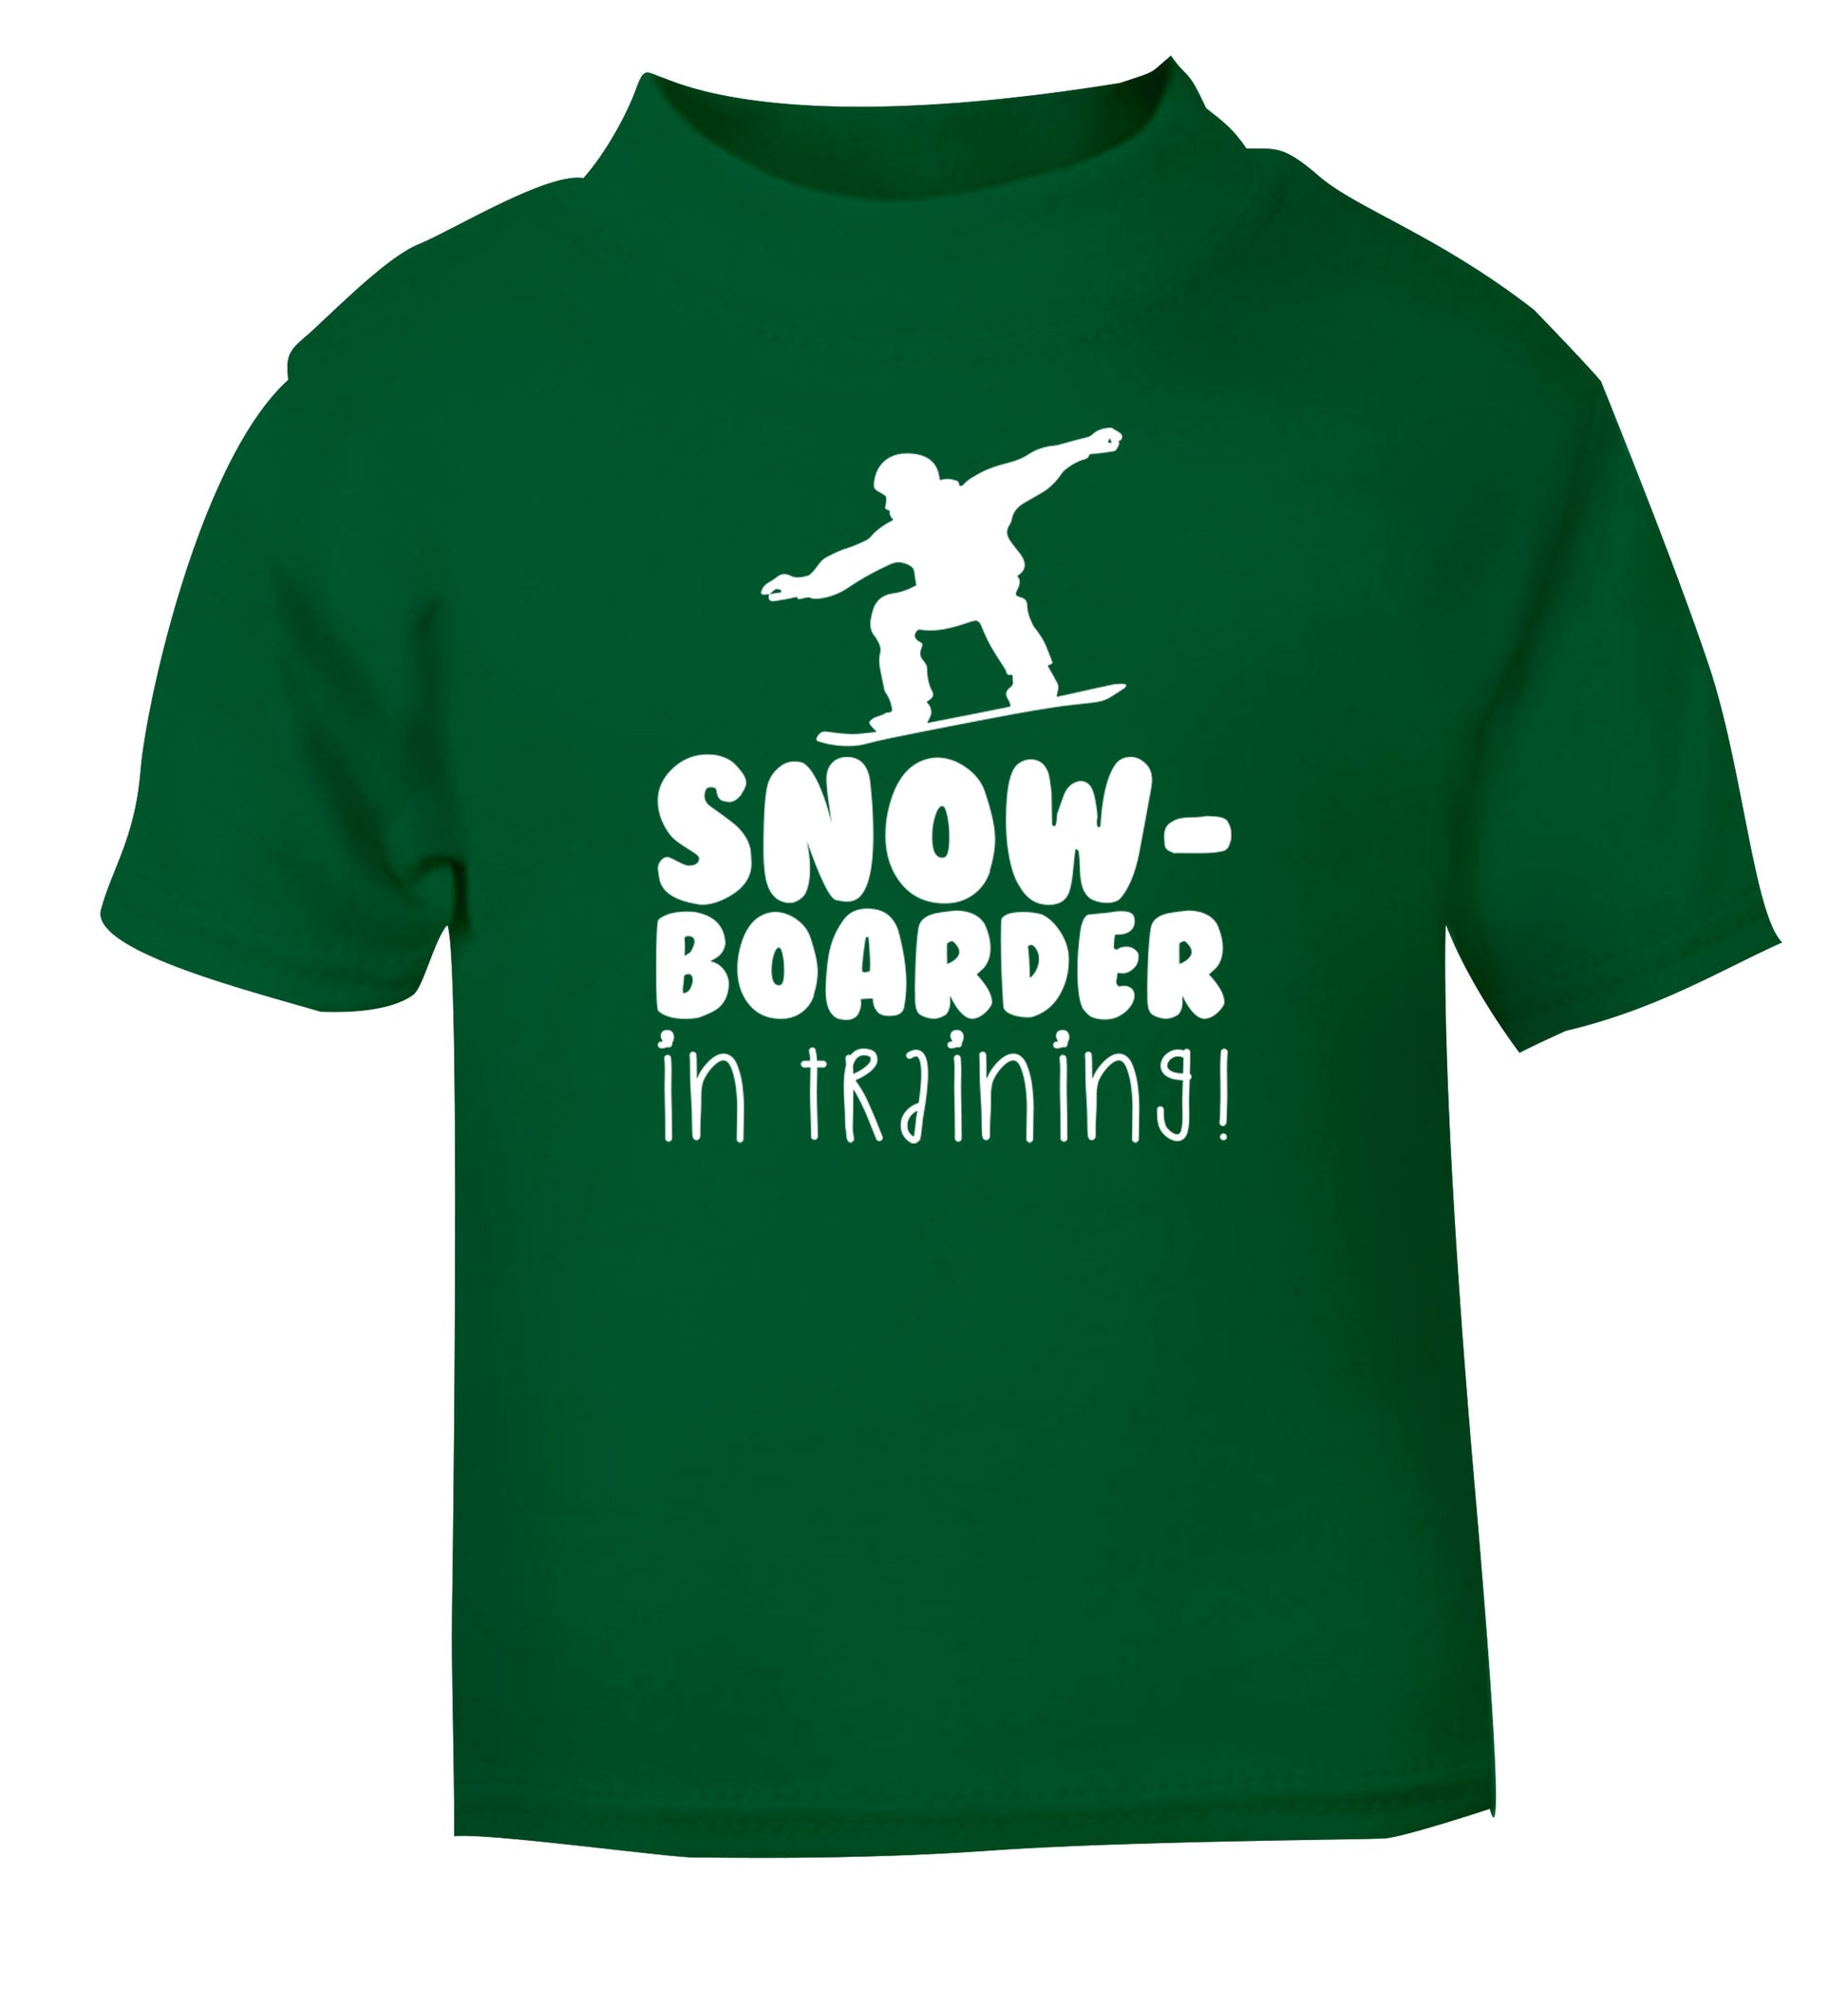 Snowboarder in training green Baby Toddler Tshirt 2 Years